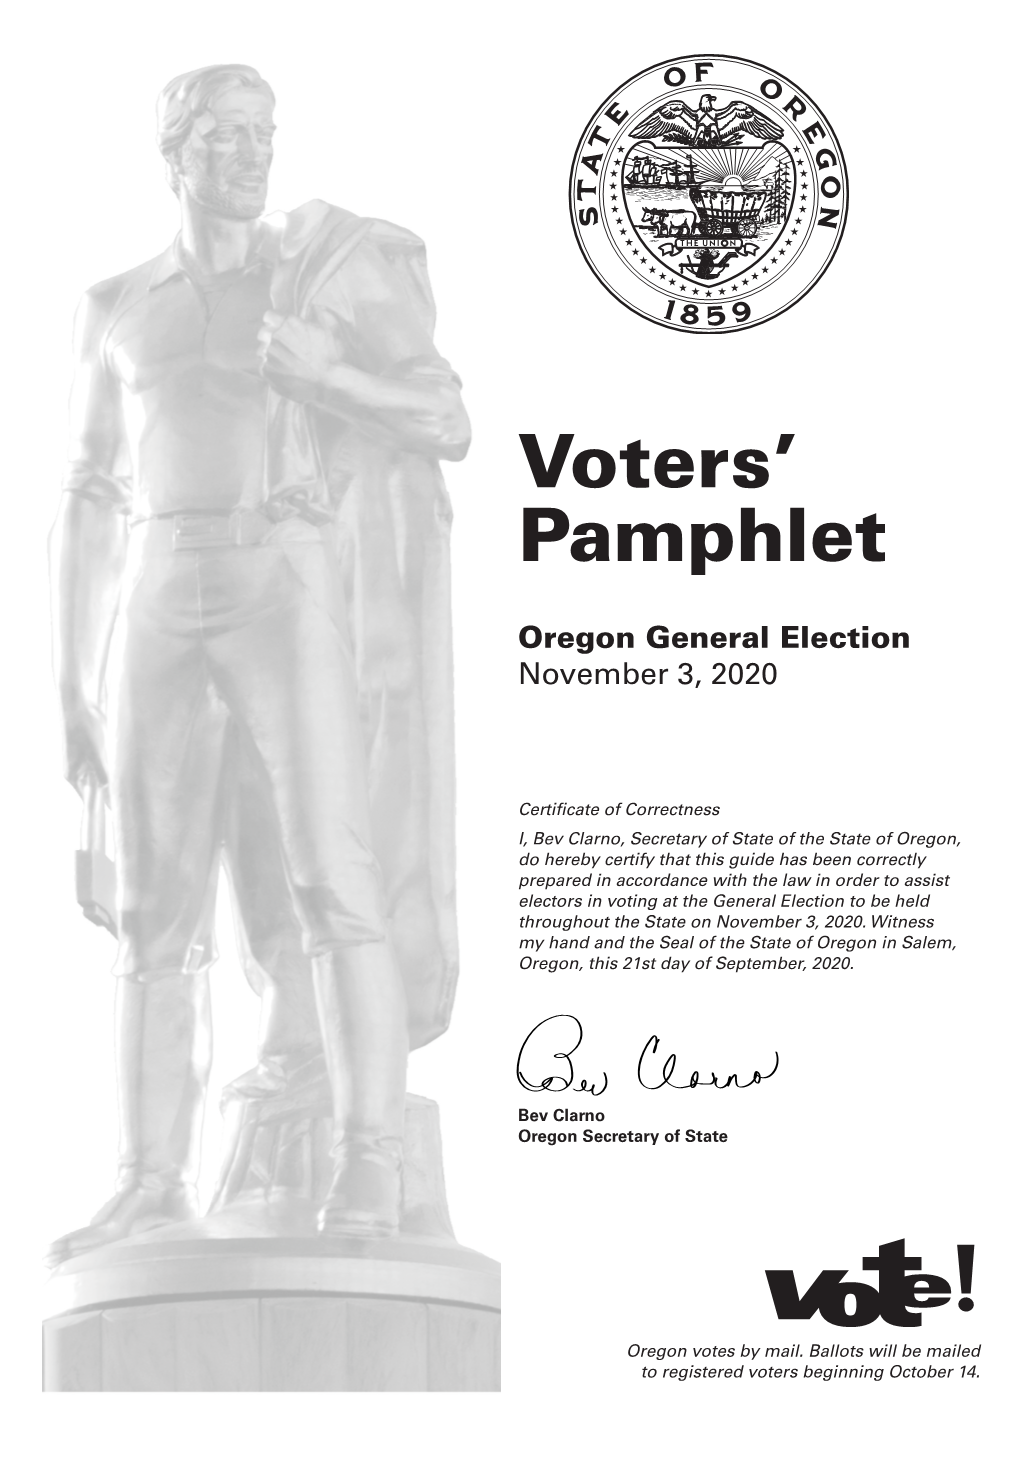 Voters' Pamphlet General Election 2020 for Klamath County